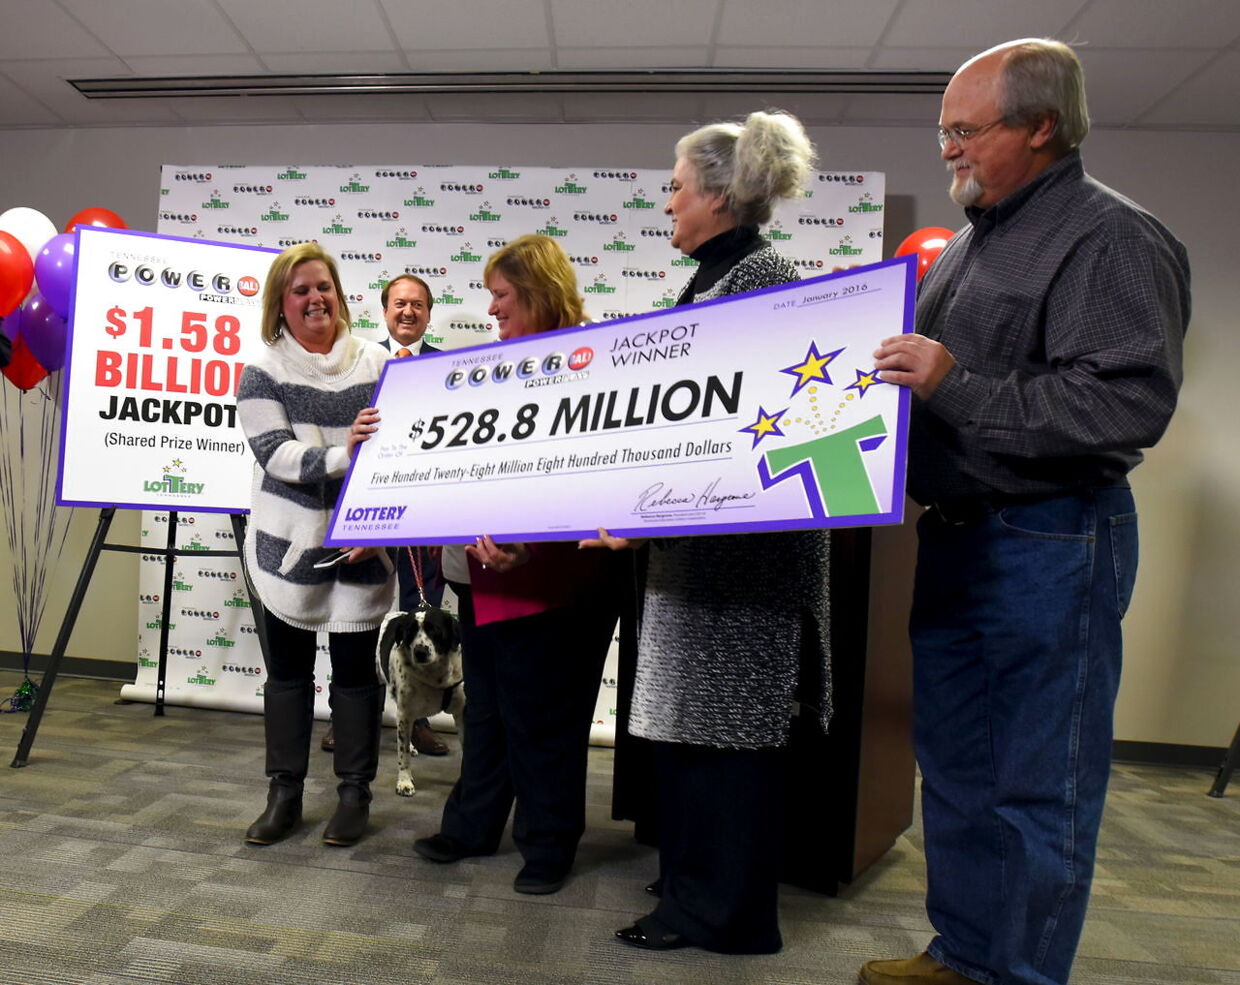 Powerball jackpot co-winners Lisa and John Robinson of Munford, Tennessee, their daughter Tiffany Robinson (L) and Tennessee Lottery President and CEO Rebecca Hargrove attend a news conference at the headquarters of the Tennessee Lottery in Nashville, Tennessee January 15, 2016. The couple revealed on the TODAY television show that they held a winning ticket to claim their share of the $1.6 billion Powerball prize. REUTERS/Harrison McClary TPX IMAGES OF THE DAY